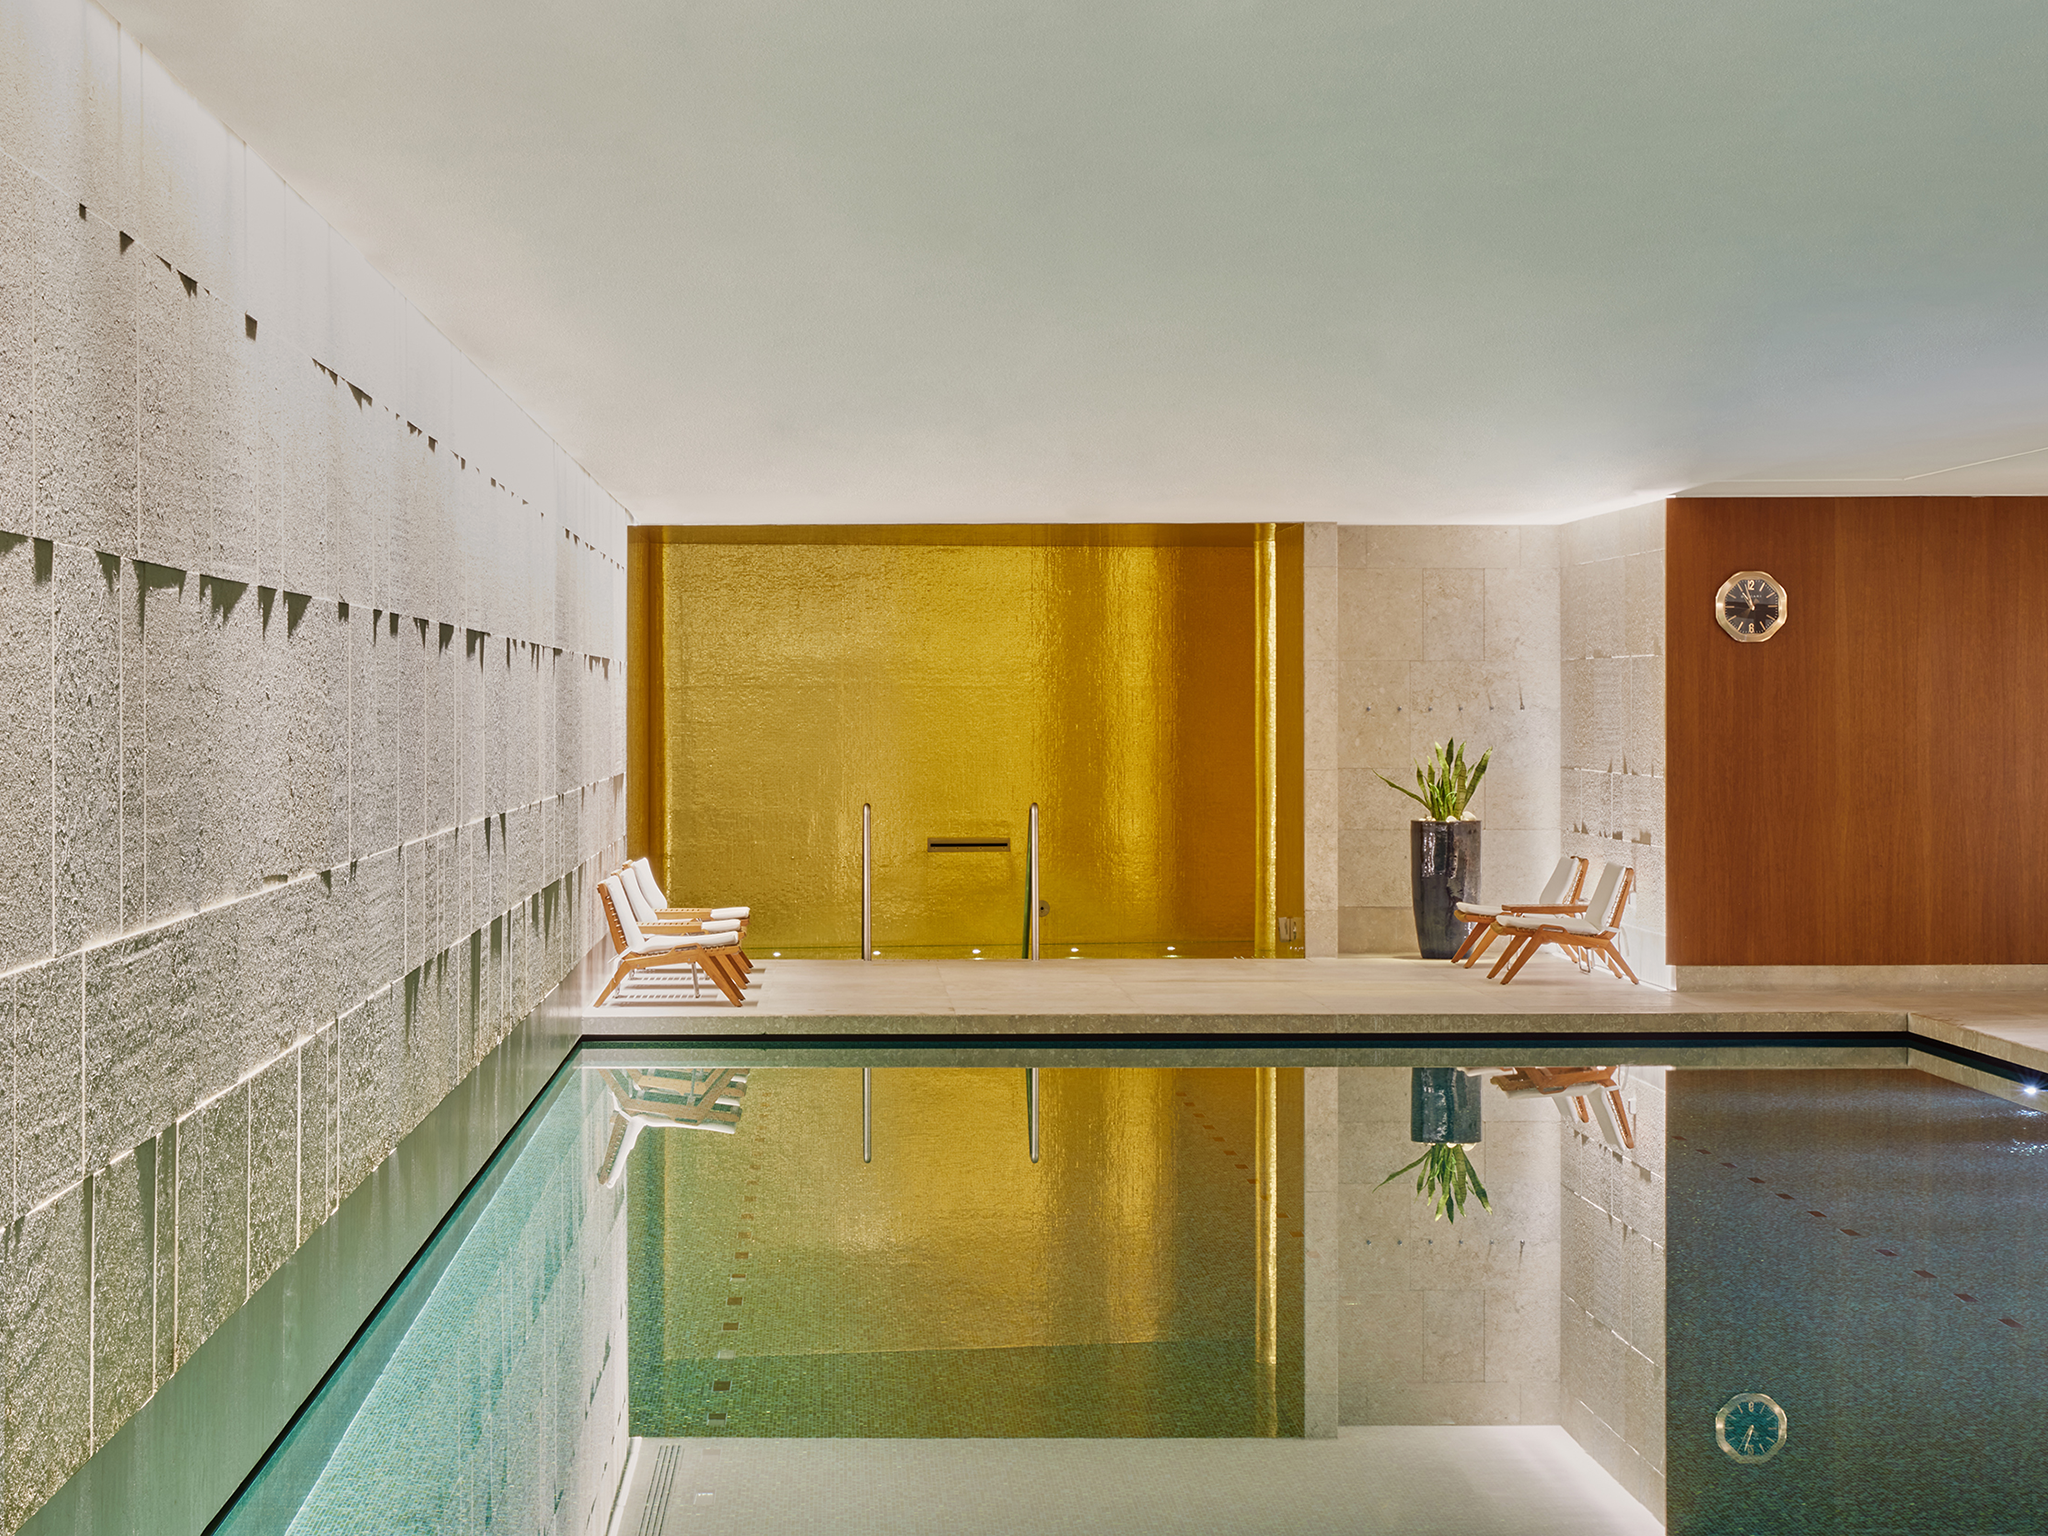 The Bulgari Hotel has the most extra design of all hot tubs on this list